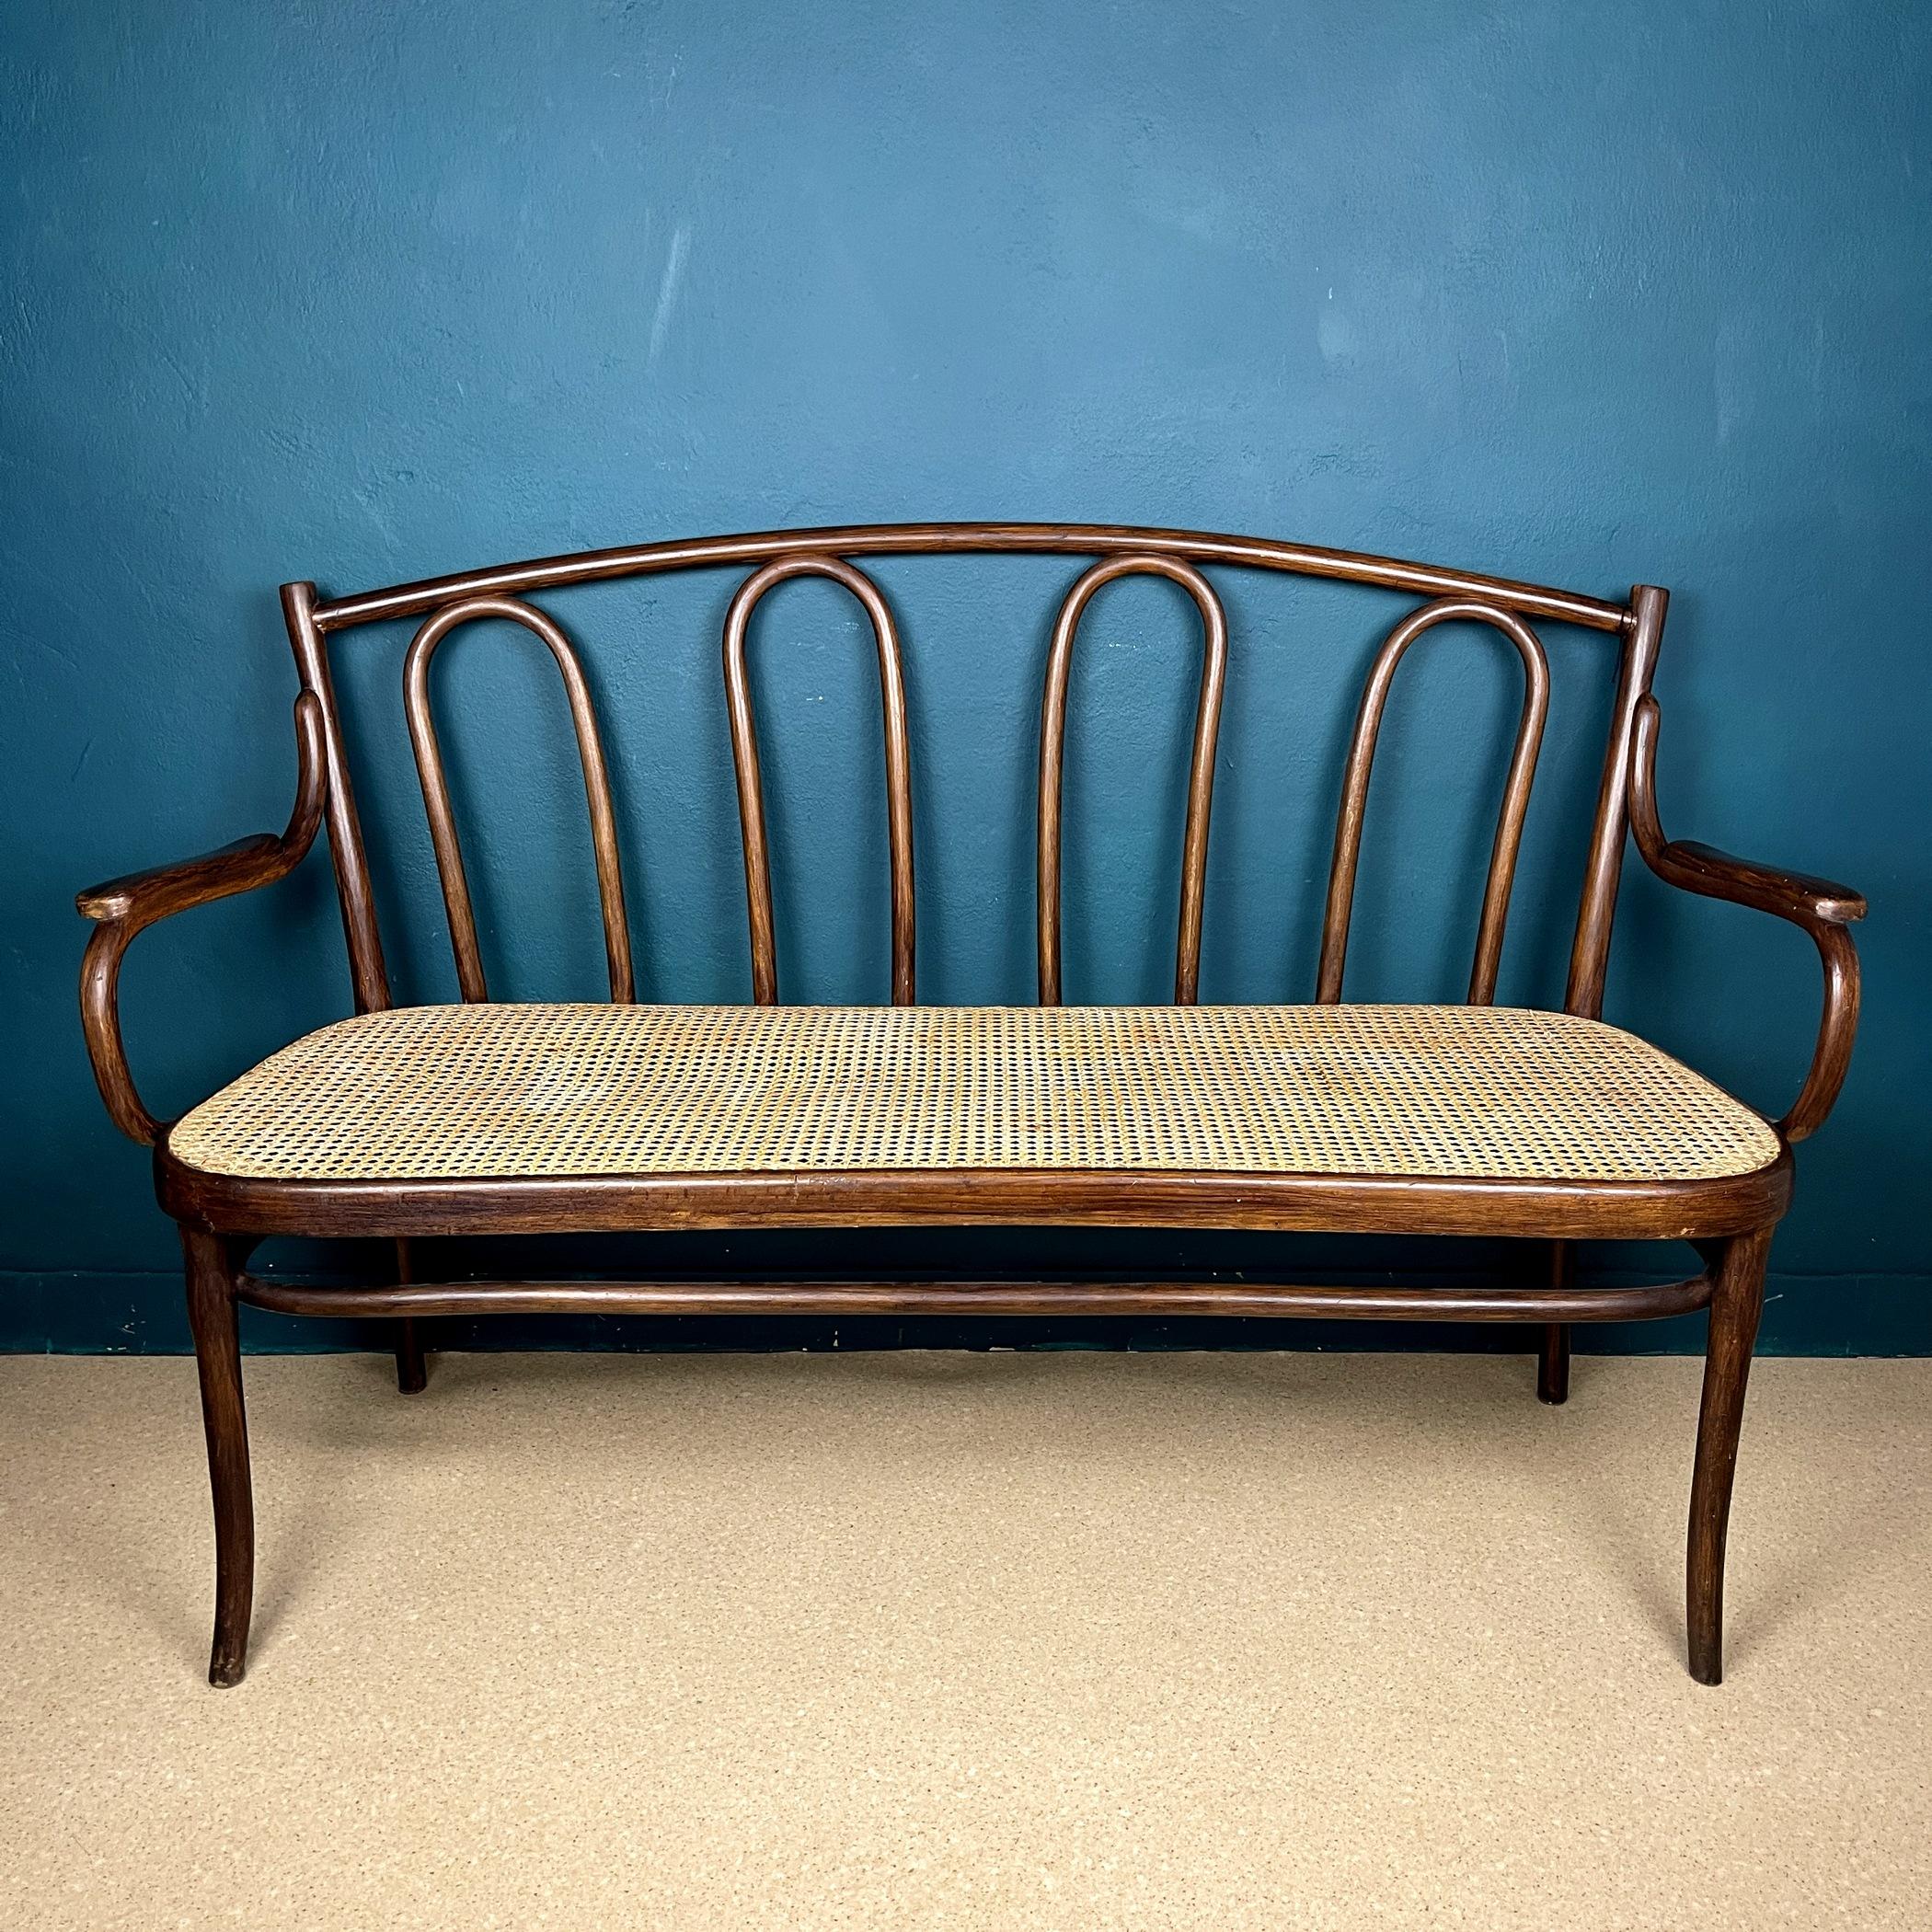 This beautifully preserved triple bench, crafted from steam-bent beech, originates from Austria and was manufactured by Gebrüder Thonet Vienna in the 1930s. It exudes the timeless charm of simple yet refined forms, showcasing the exceptional